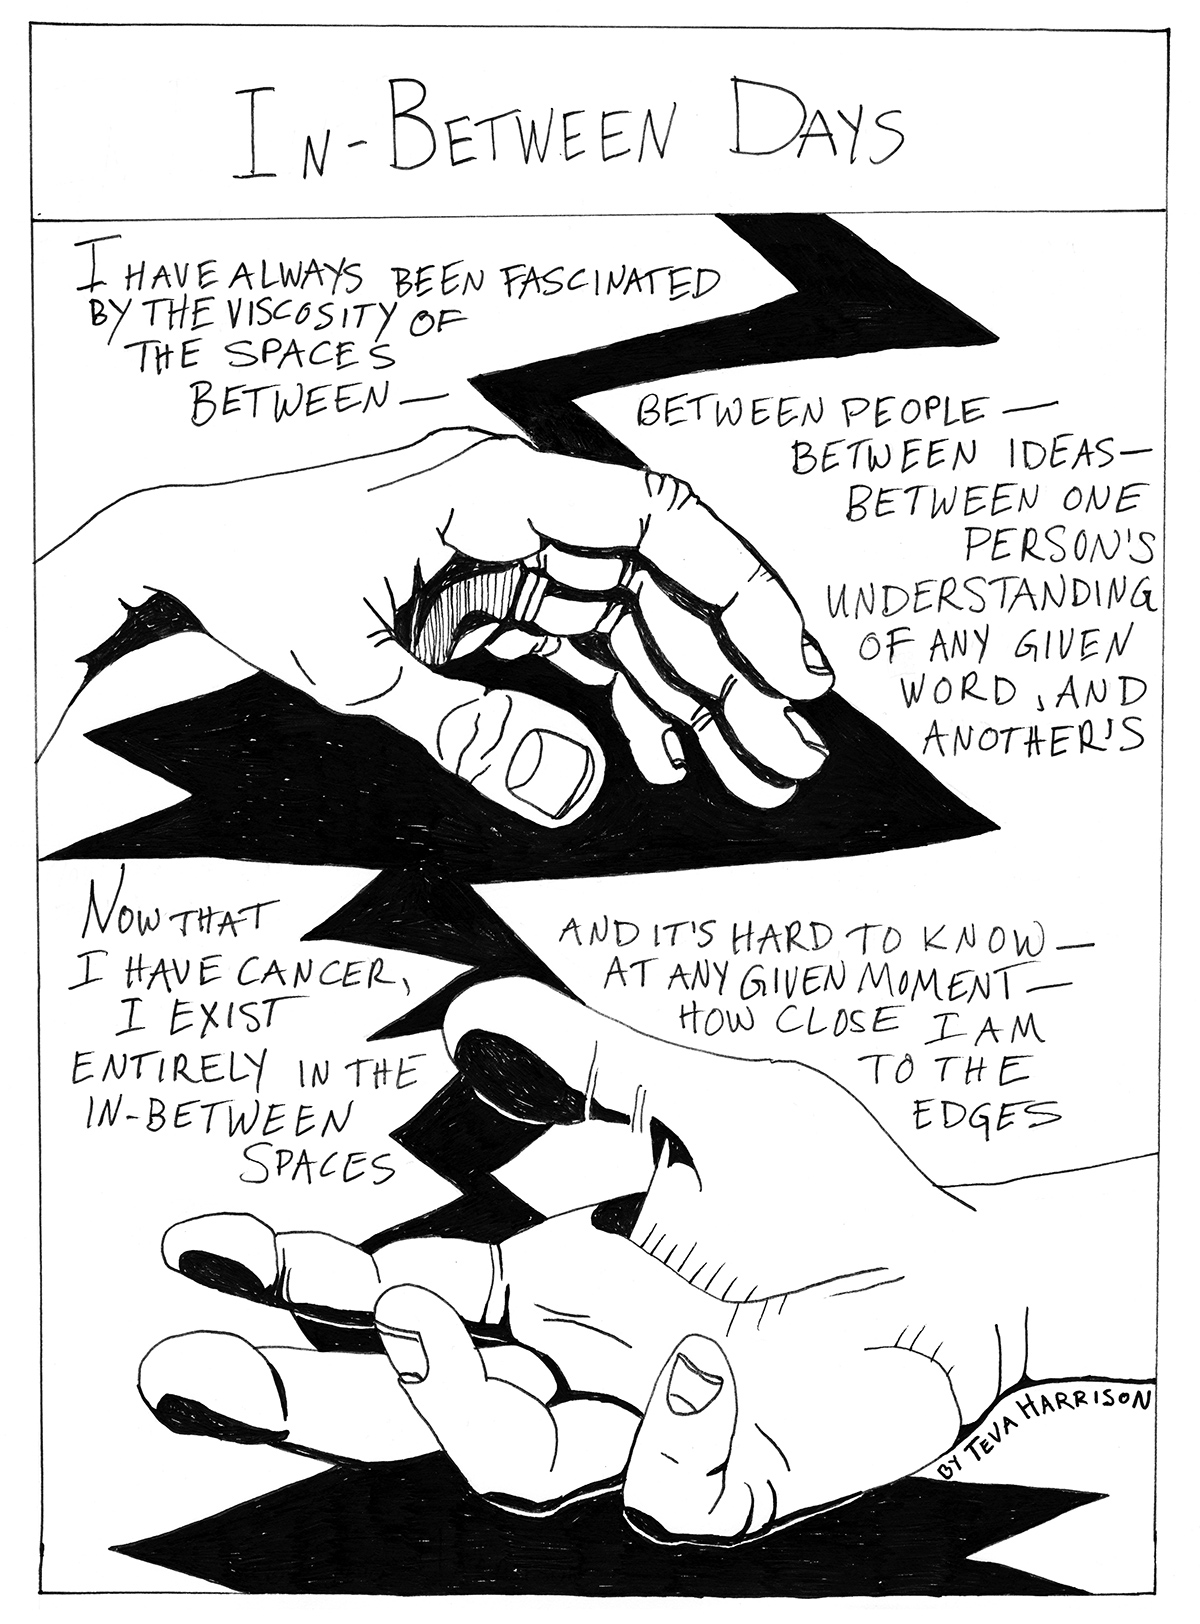 Black and white illustration of two hands on a jagged black crack in the background. Title across the top is "In-Between Days" and the text below reads: "I have always been fascinated by the viscosity of the spaces between - between people - between ideas - between one person's understanding of any given word, and another's. Now that I have cancer, I exist entirely in the in-between spaces and it's hard to know - at any given moment - how closes I am to the edges."